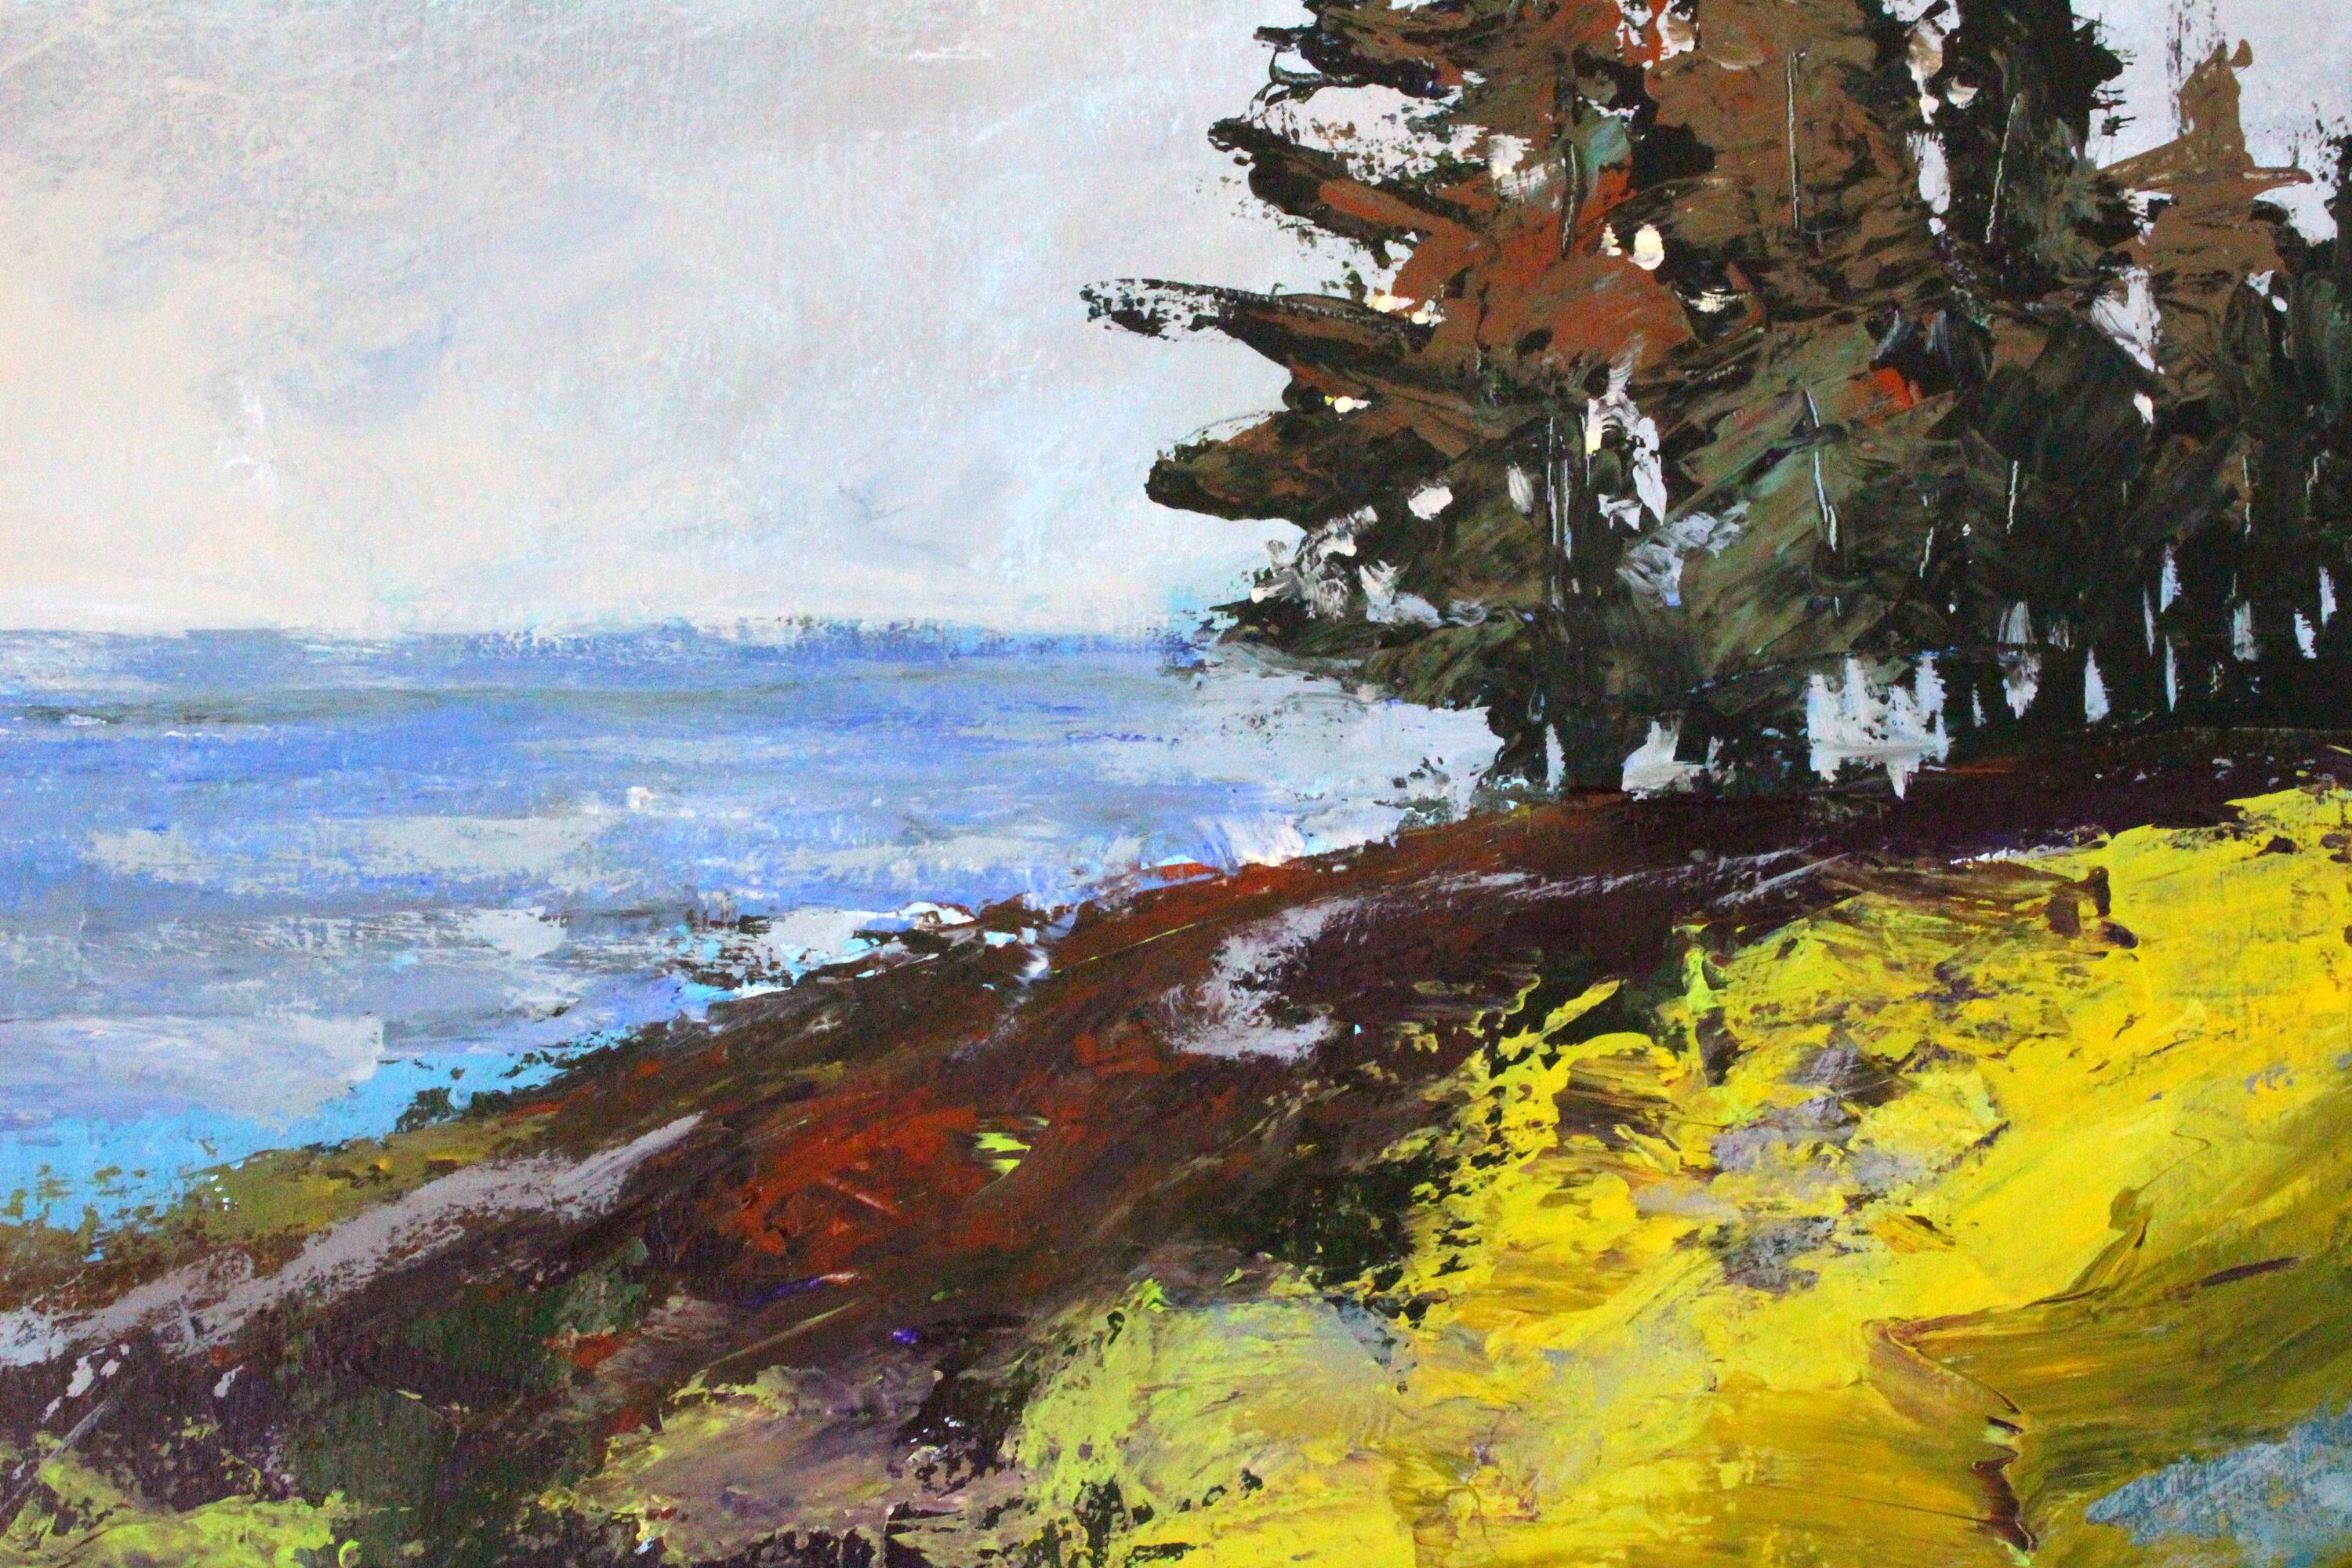 <p>Artist Comments<br />The Strait of Juan de Fuca in Washington State provided the inspiration for this semi-abstract landscape painting. A rugged shoreline, a stand of evergreen trees, and the blue of water and sky support the design. Cool shades